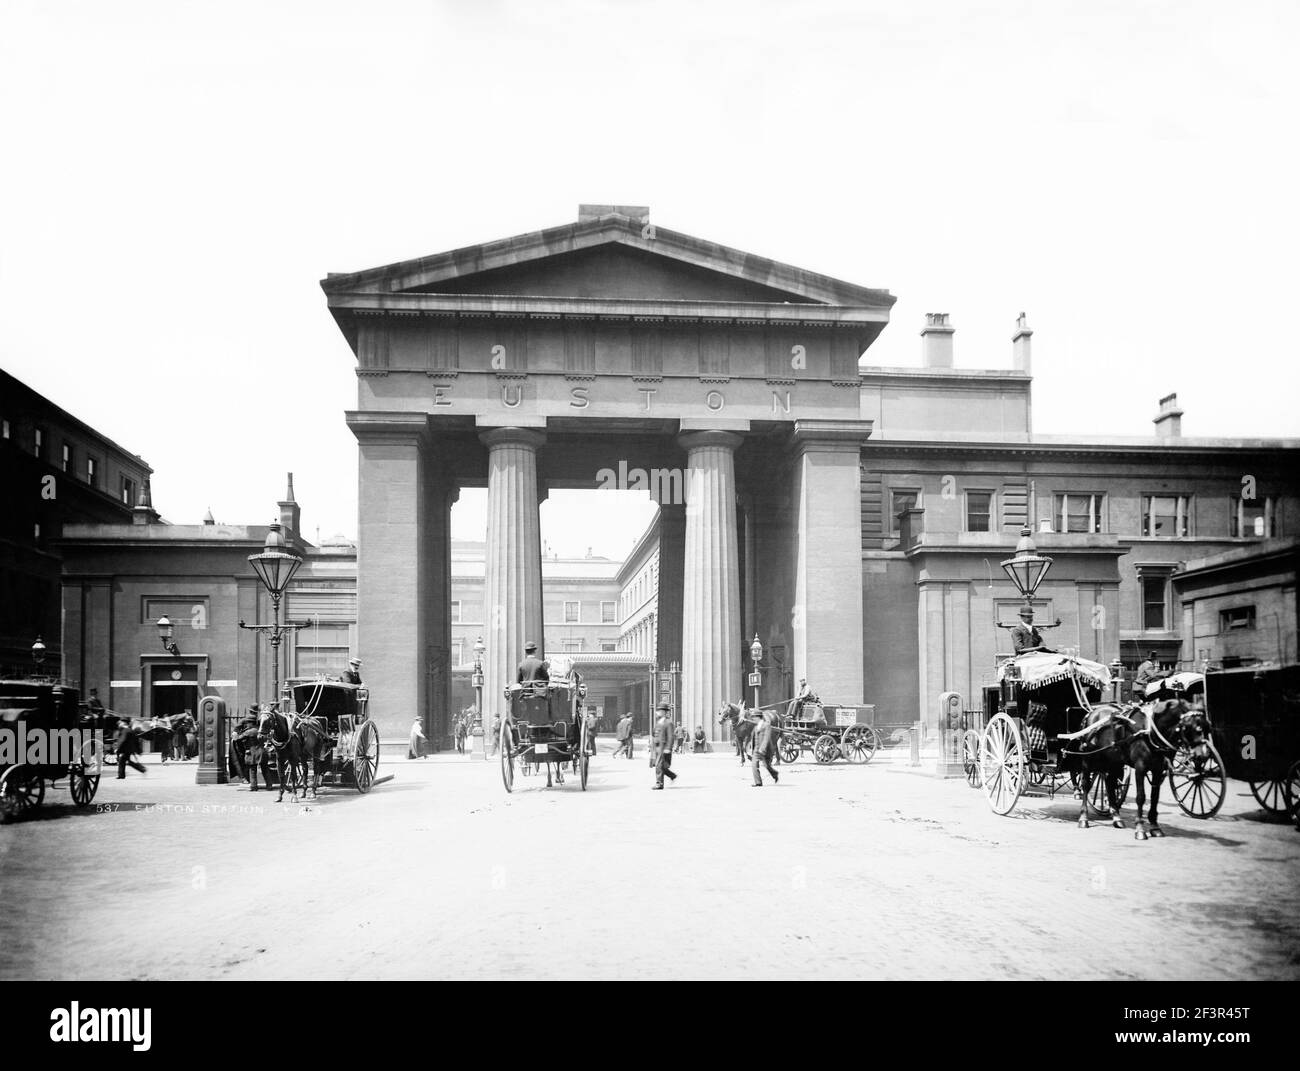 EUSTON ARCH, London. View of the arch at Euston Station with horse-drawn vehicles in the foreground. The arch was built by Philip Hardwick in 1838 and Stock Photo